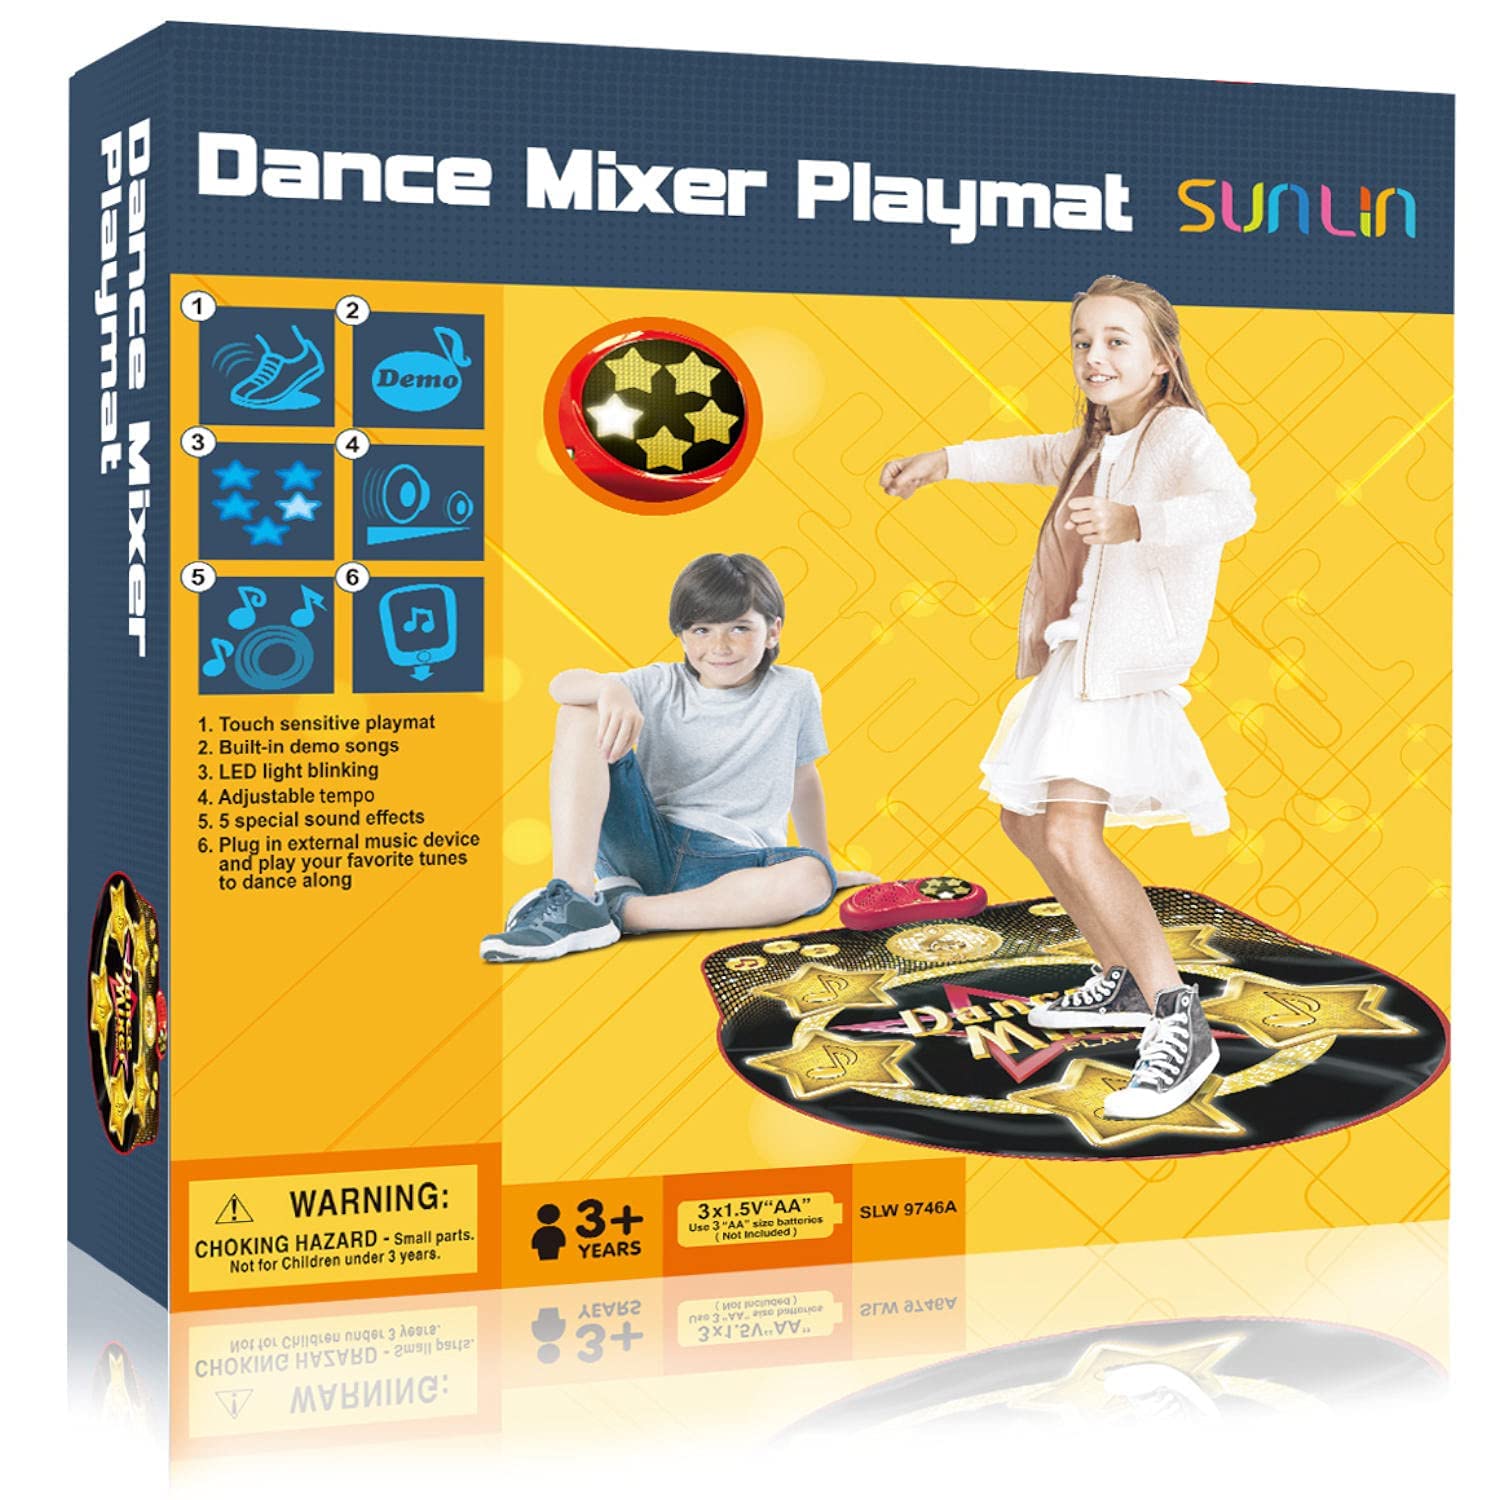 SUNLIN Dance Mat for Kids - Toys for Girls Boys Ages 3-12 Years Old - Electronic Light Up Dance Game Pad with Built-in & AUX Music - Gifts for 3 4 5 6 7 8 Year (35.8